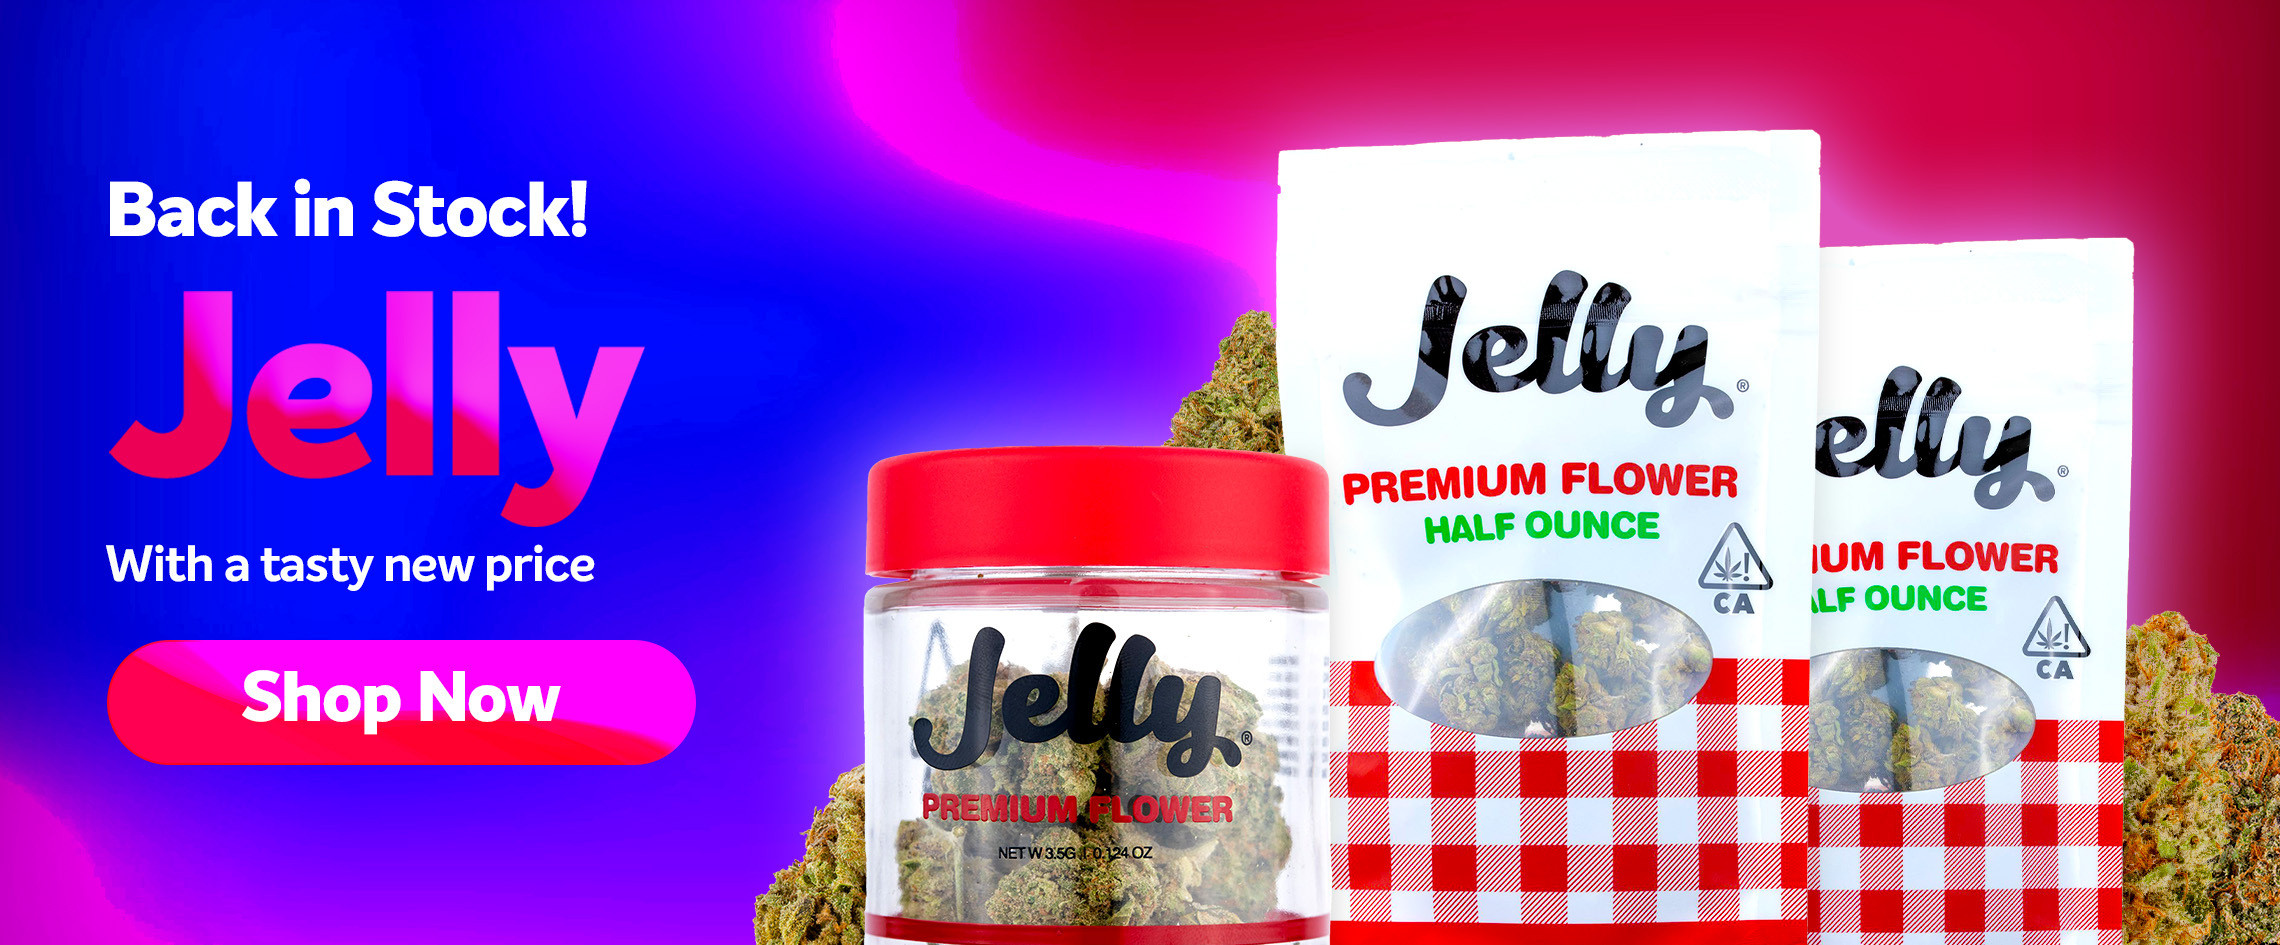 Jelly is back in stock at Grassdoor Delivery!